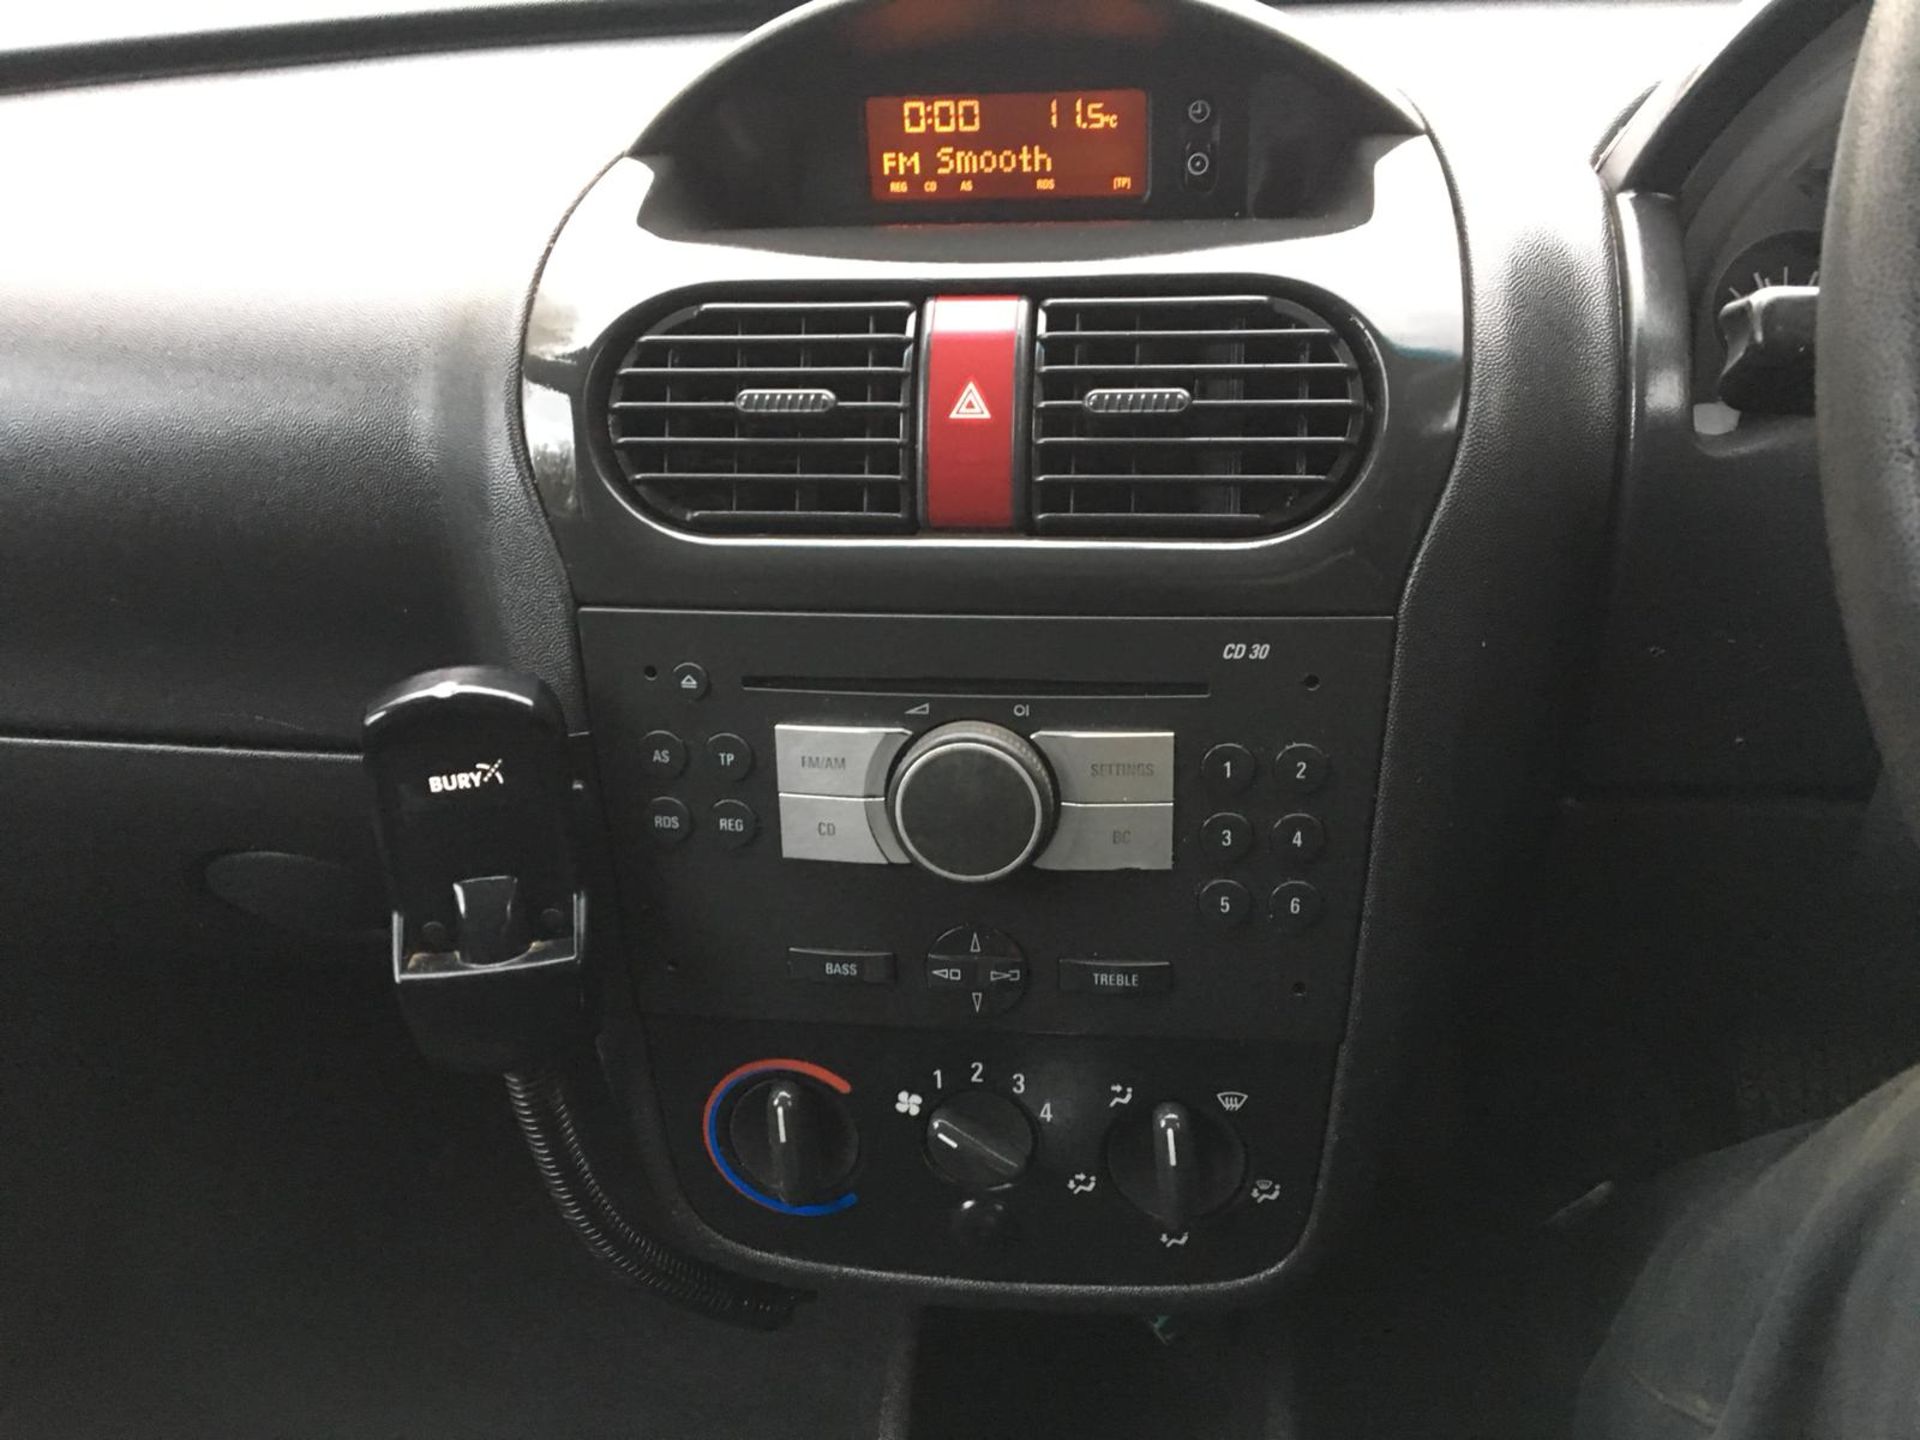 2011/11 REG VAUXHALL COMBO 2000 CDTI SEMI-AUTO GEARBOX, SHOWING 0 FORMER KEEPERS *NO VAT* - Image 10 of 12